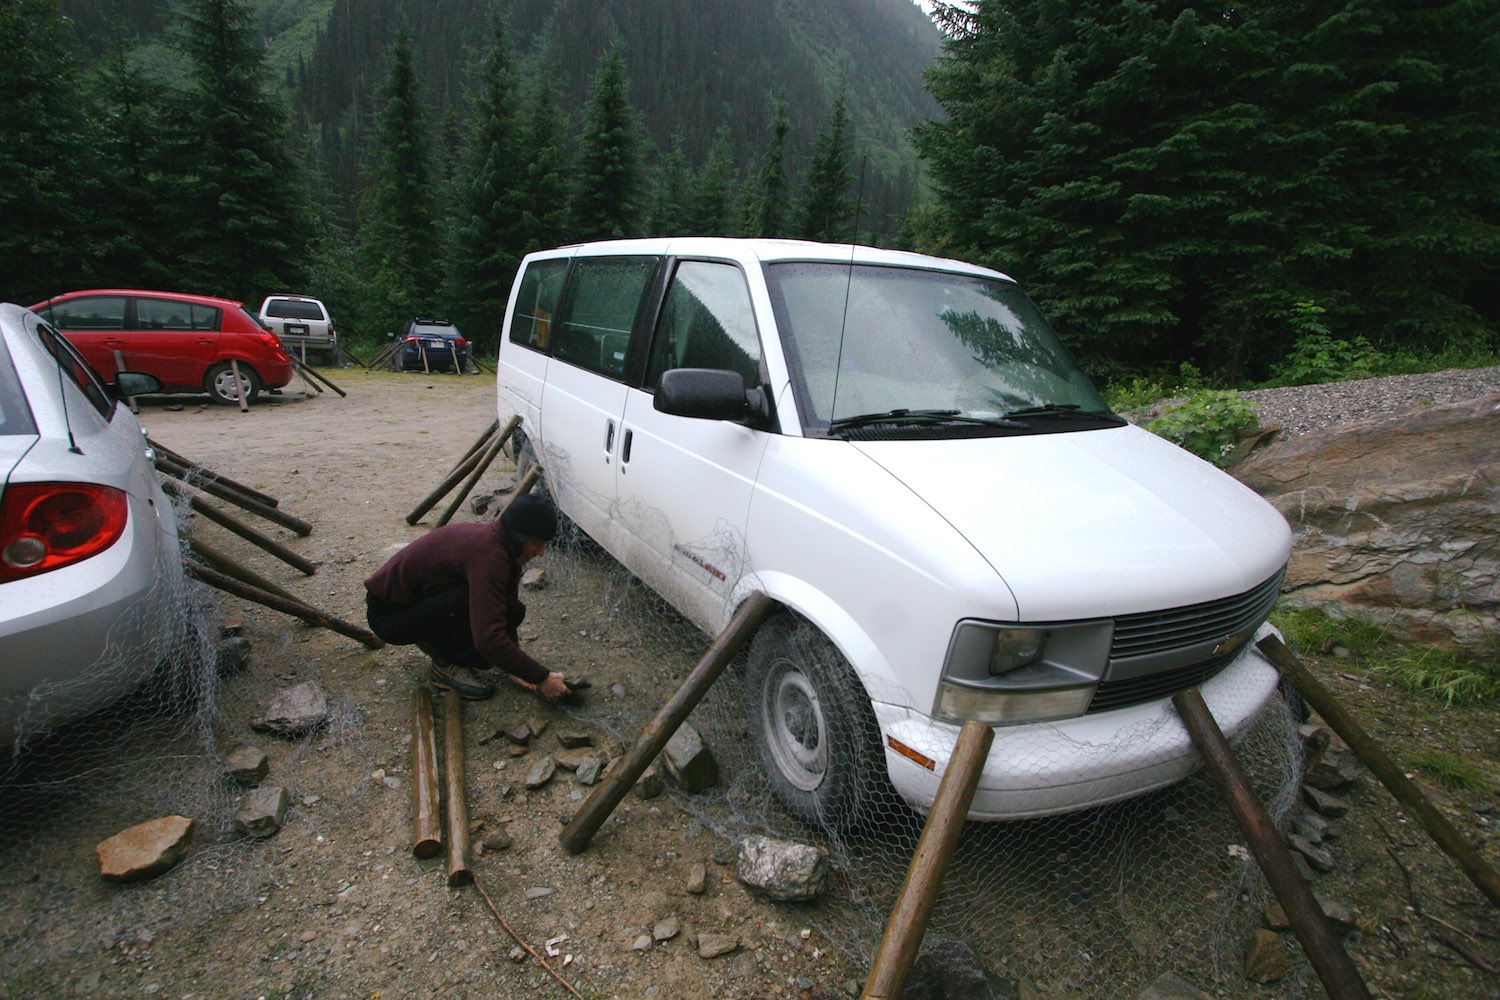  Critter-proofing our vehicle otherwise animals will chew rubber tubes, brake fluid, etc 